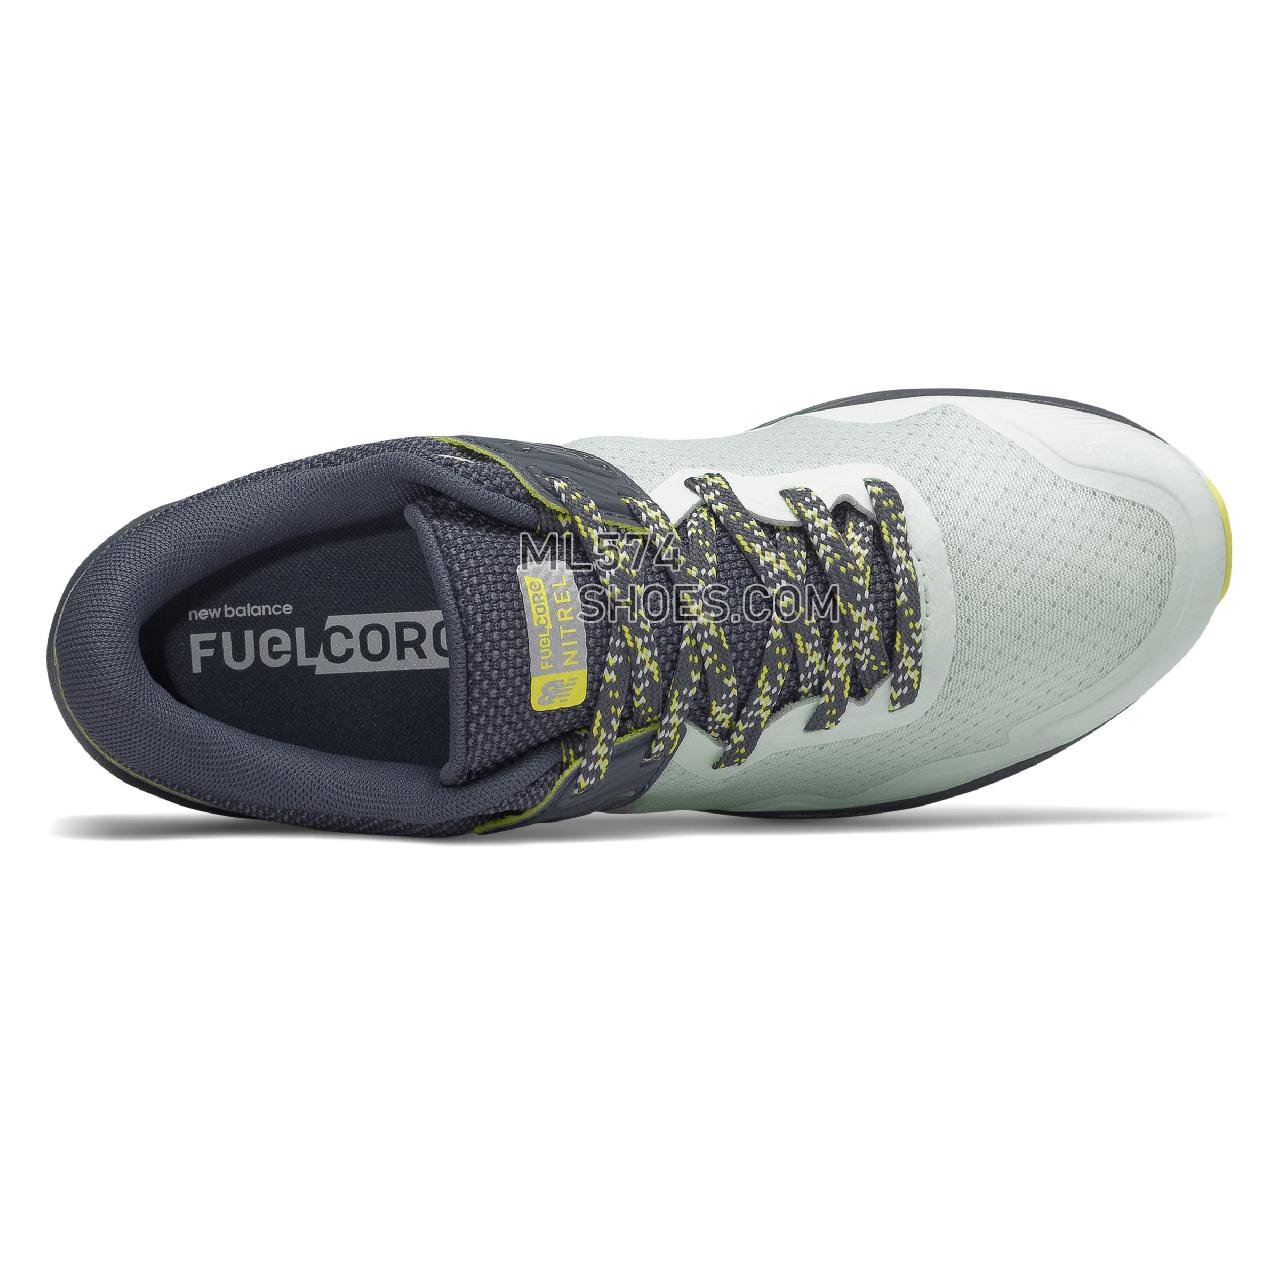 New Balance FuelCore NITREL v2 - Women's 2 - Running Ocean Air with Thunder and Limeade - WTNTRLO2